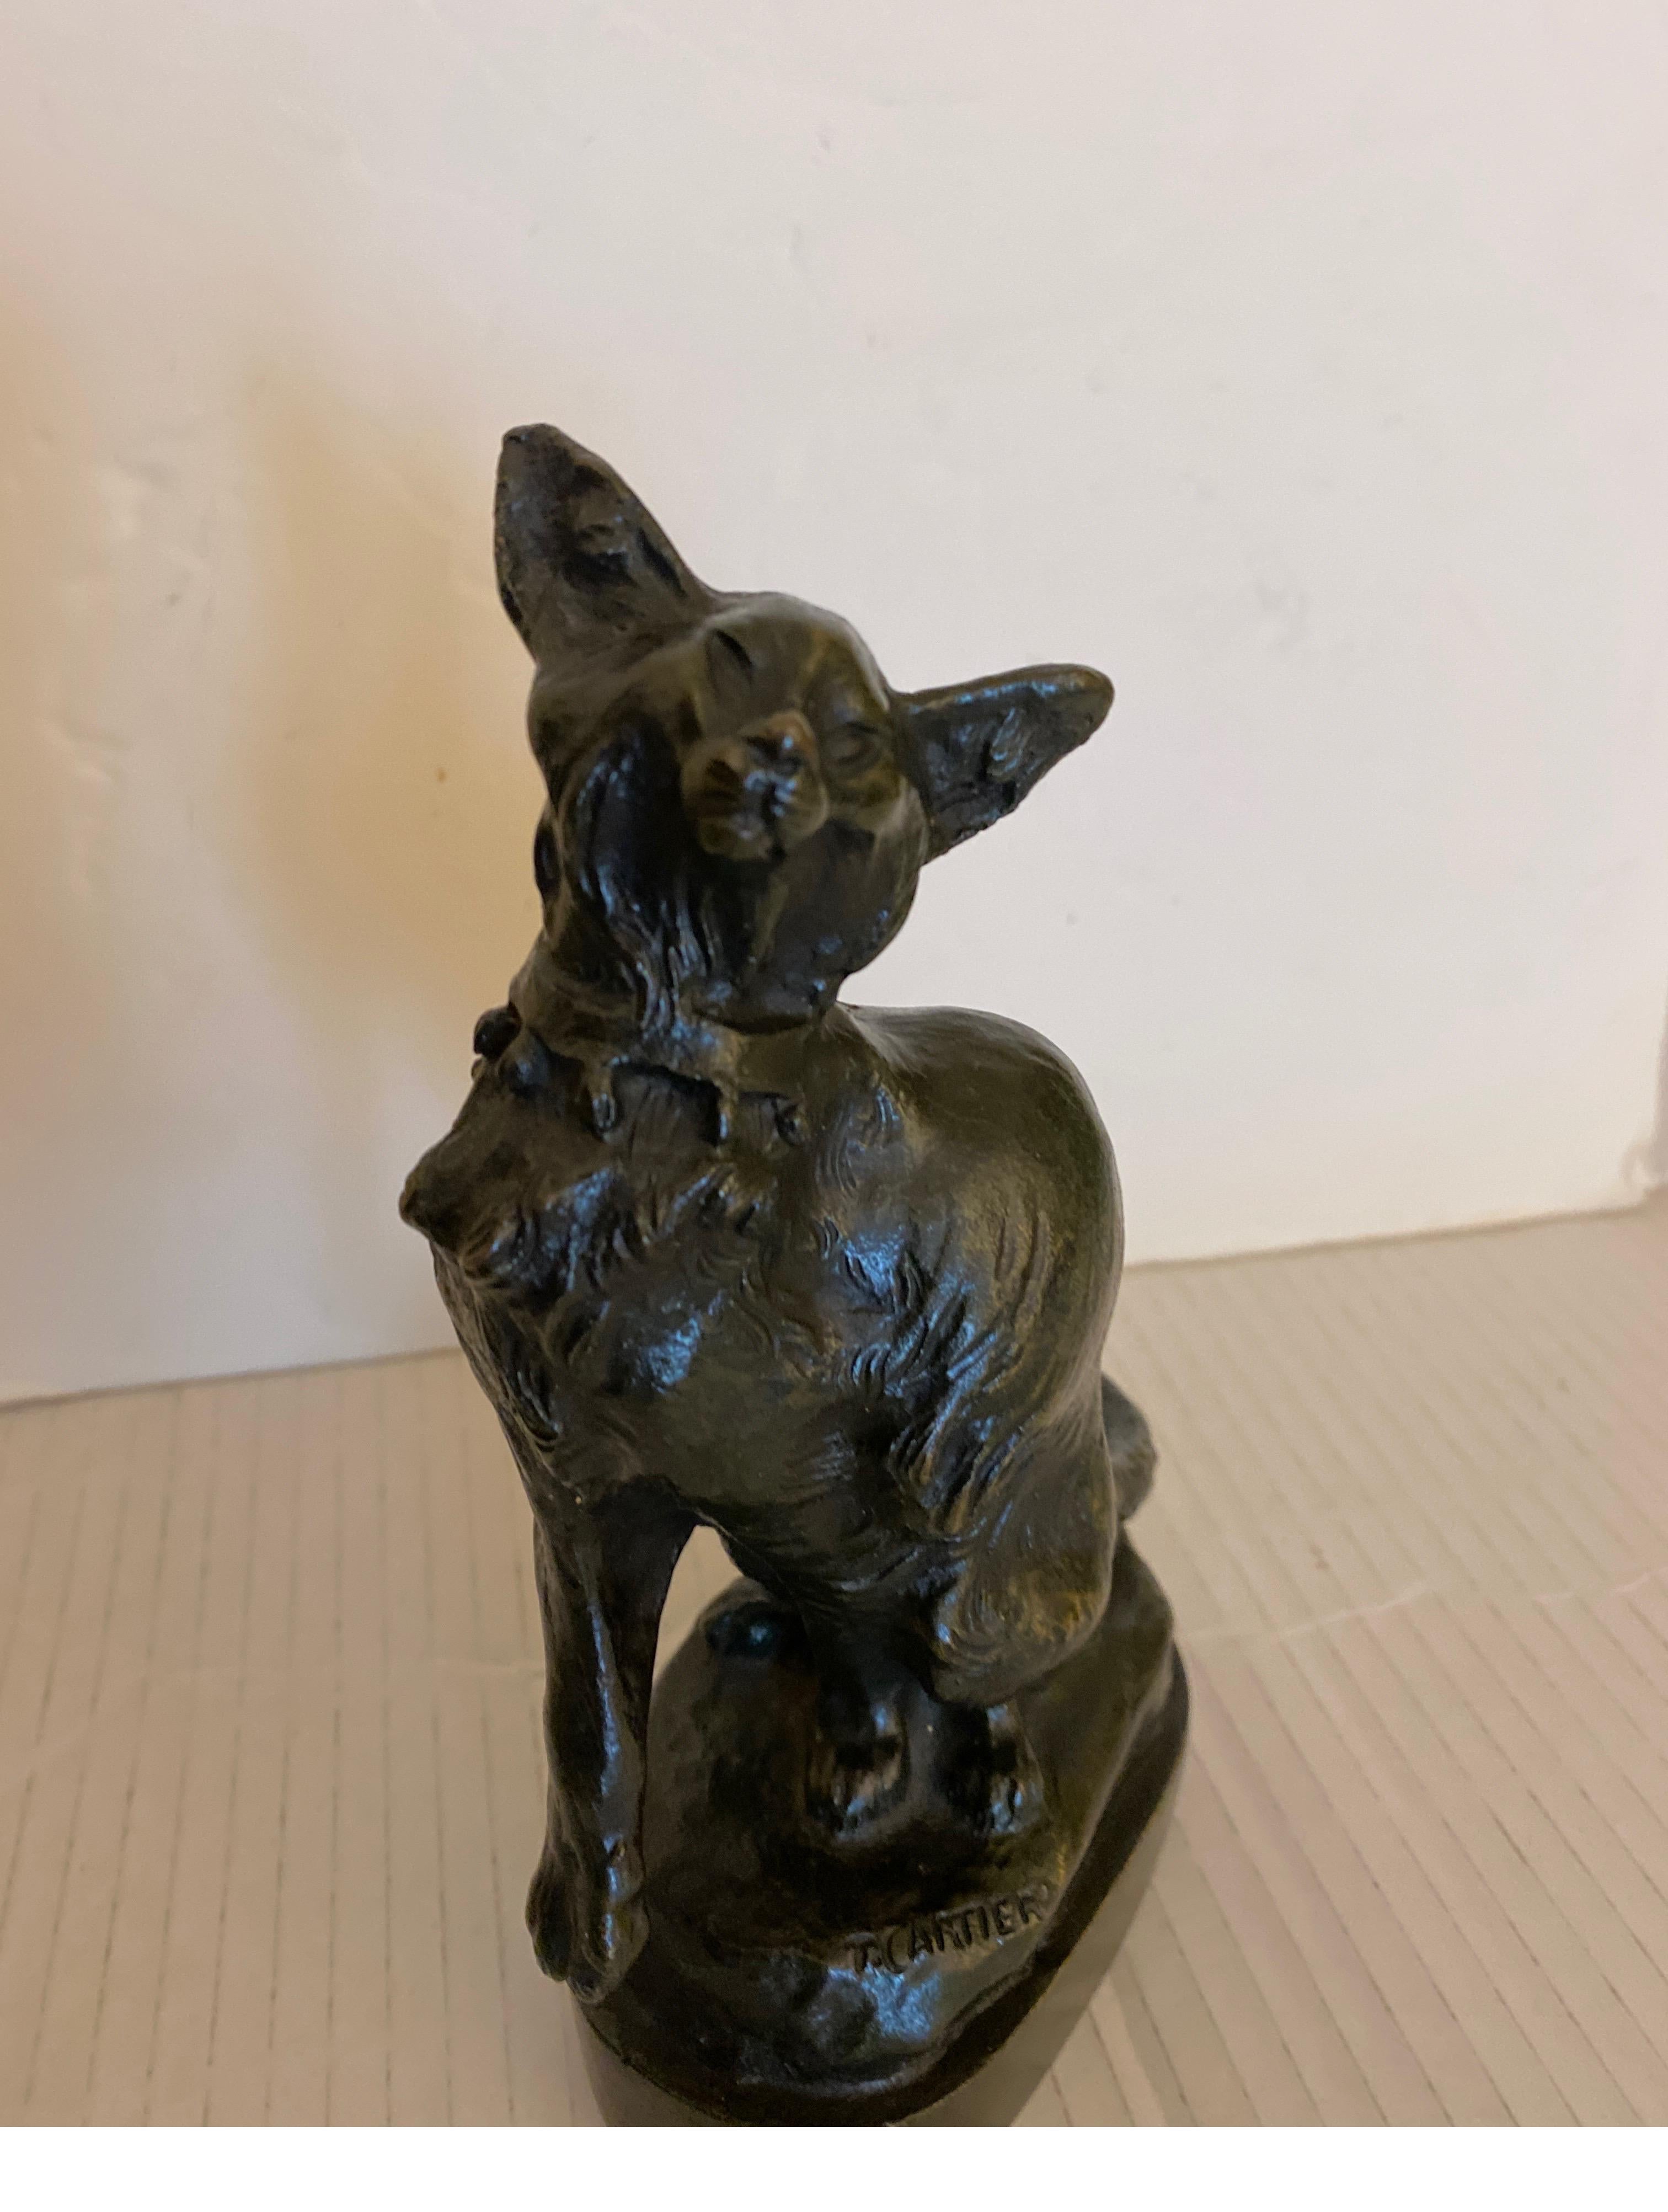 A small patinated cast bronze sculpture of a cat by Thomas Cartier (1879-1943), Signed on front and back at base. 6.5 inches tall 
Born in Marseilles in February of 1879, Thomas Francois Cartier was an animalier best known for his small bronze